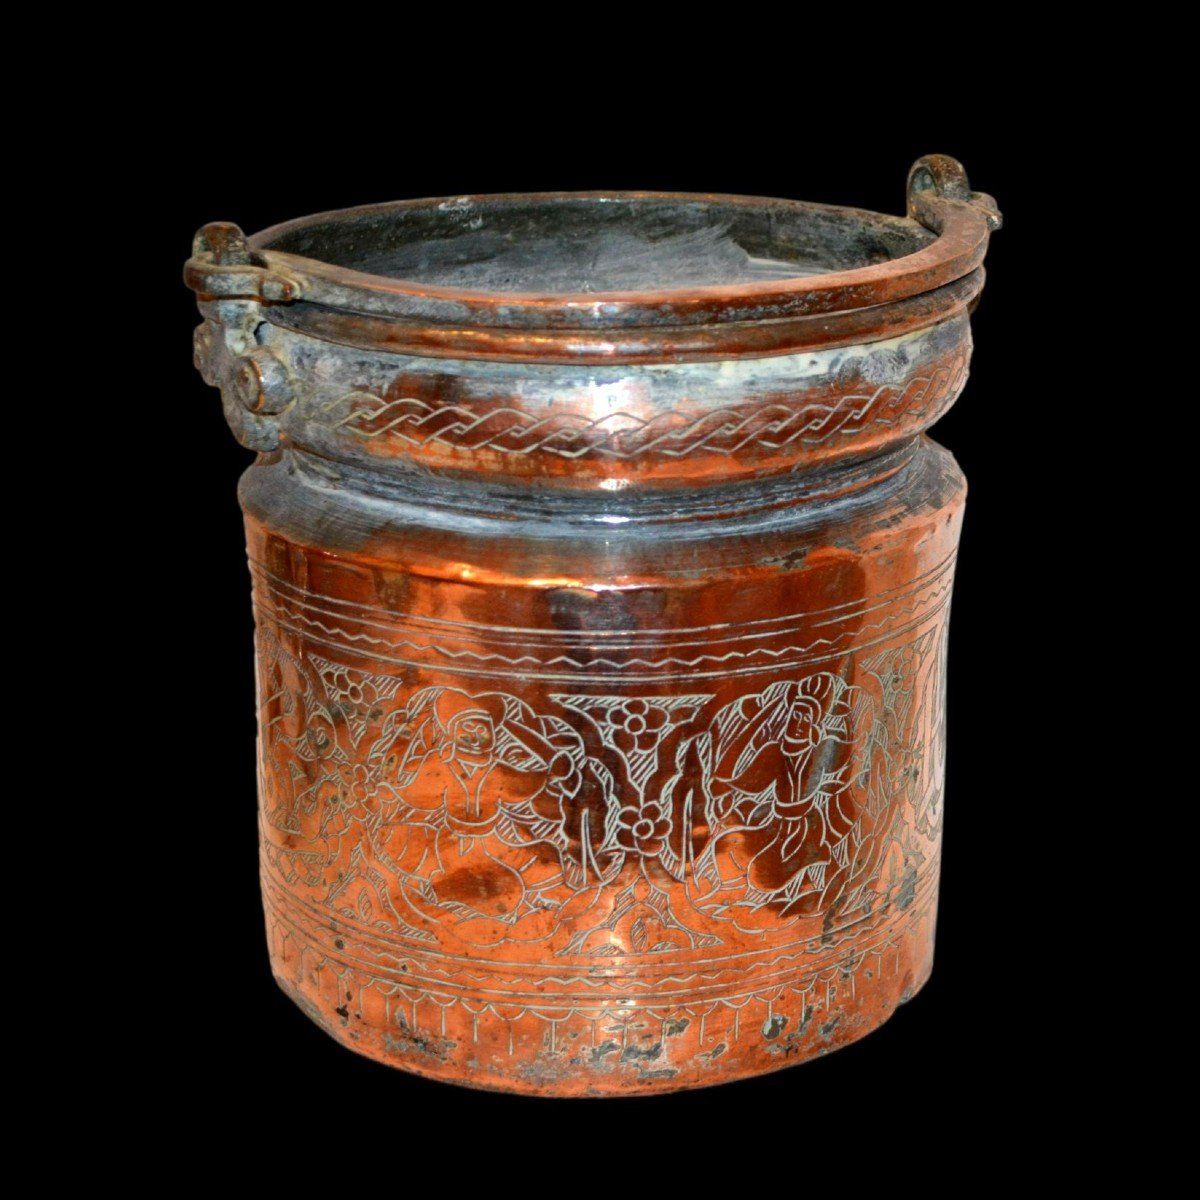 Cauldron, Tinned Copper, 19th Century Persia, Decorated With Medallions, Calligraphy And Seated Princes-photo-1